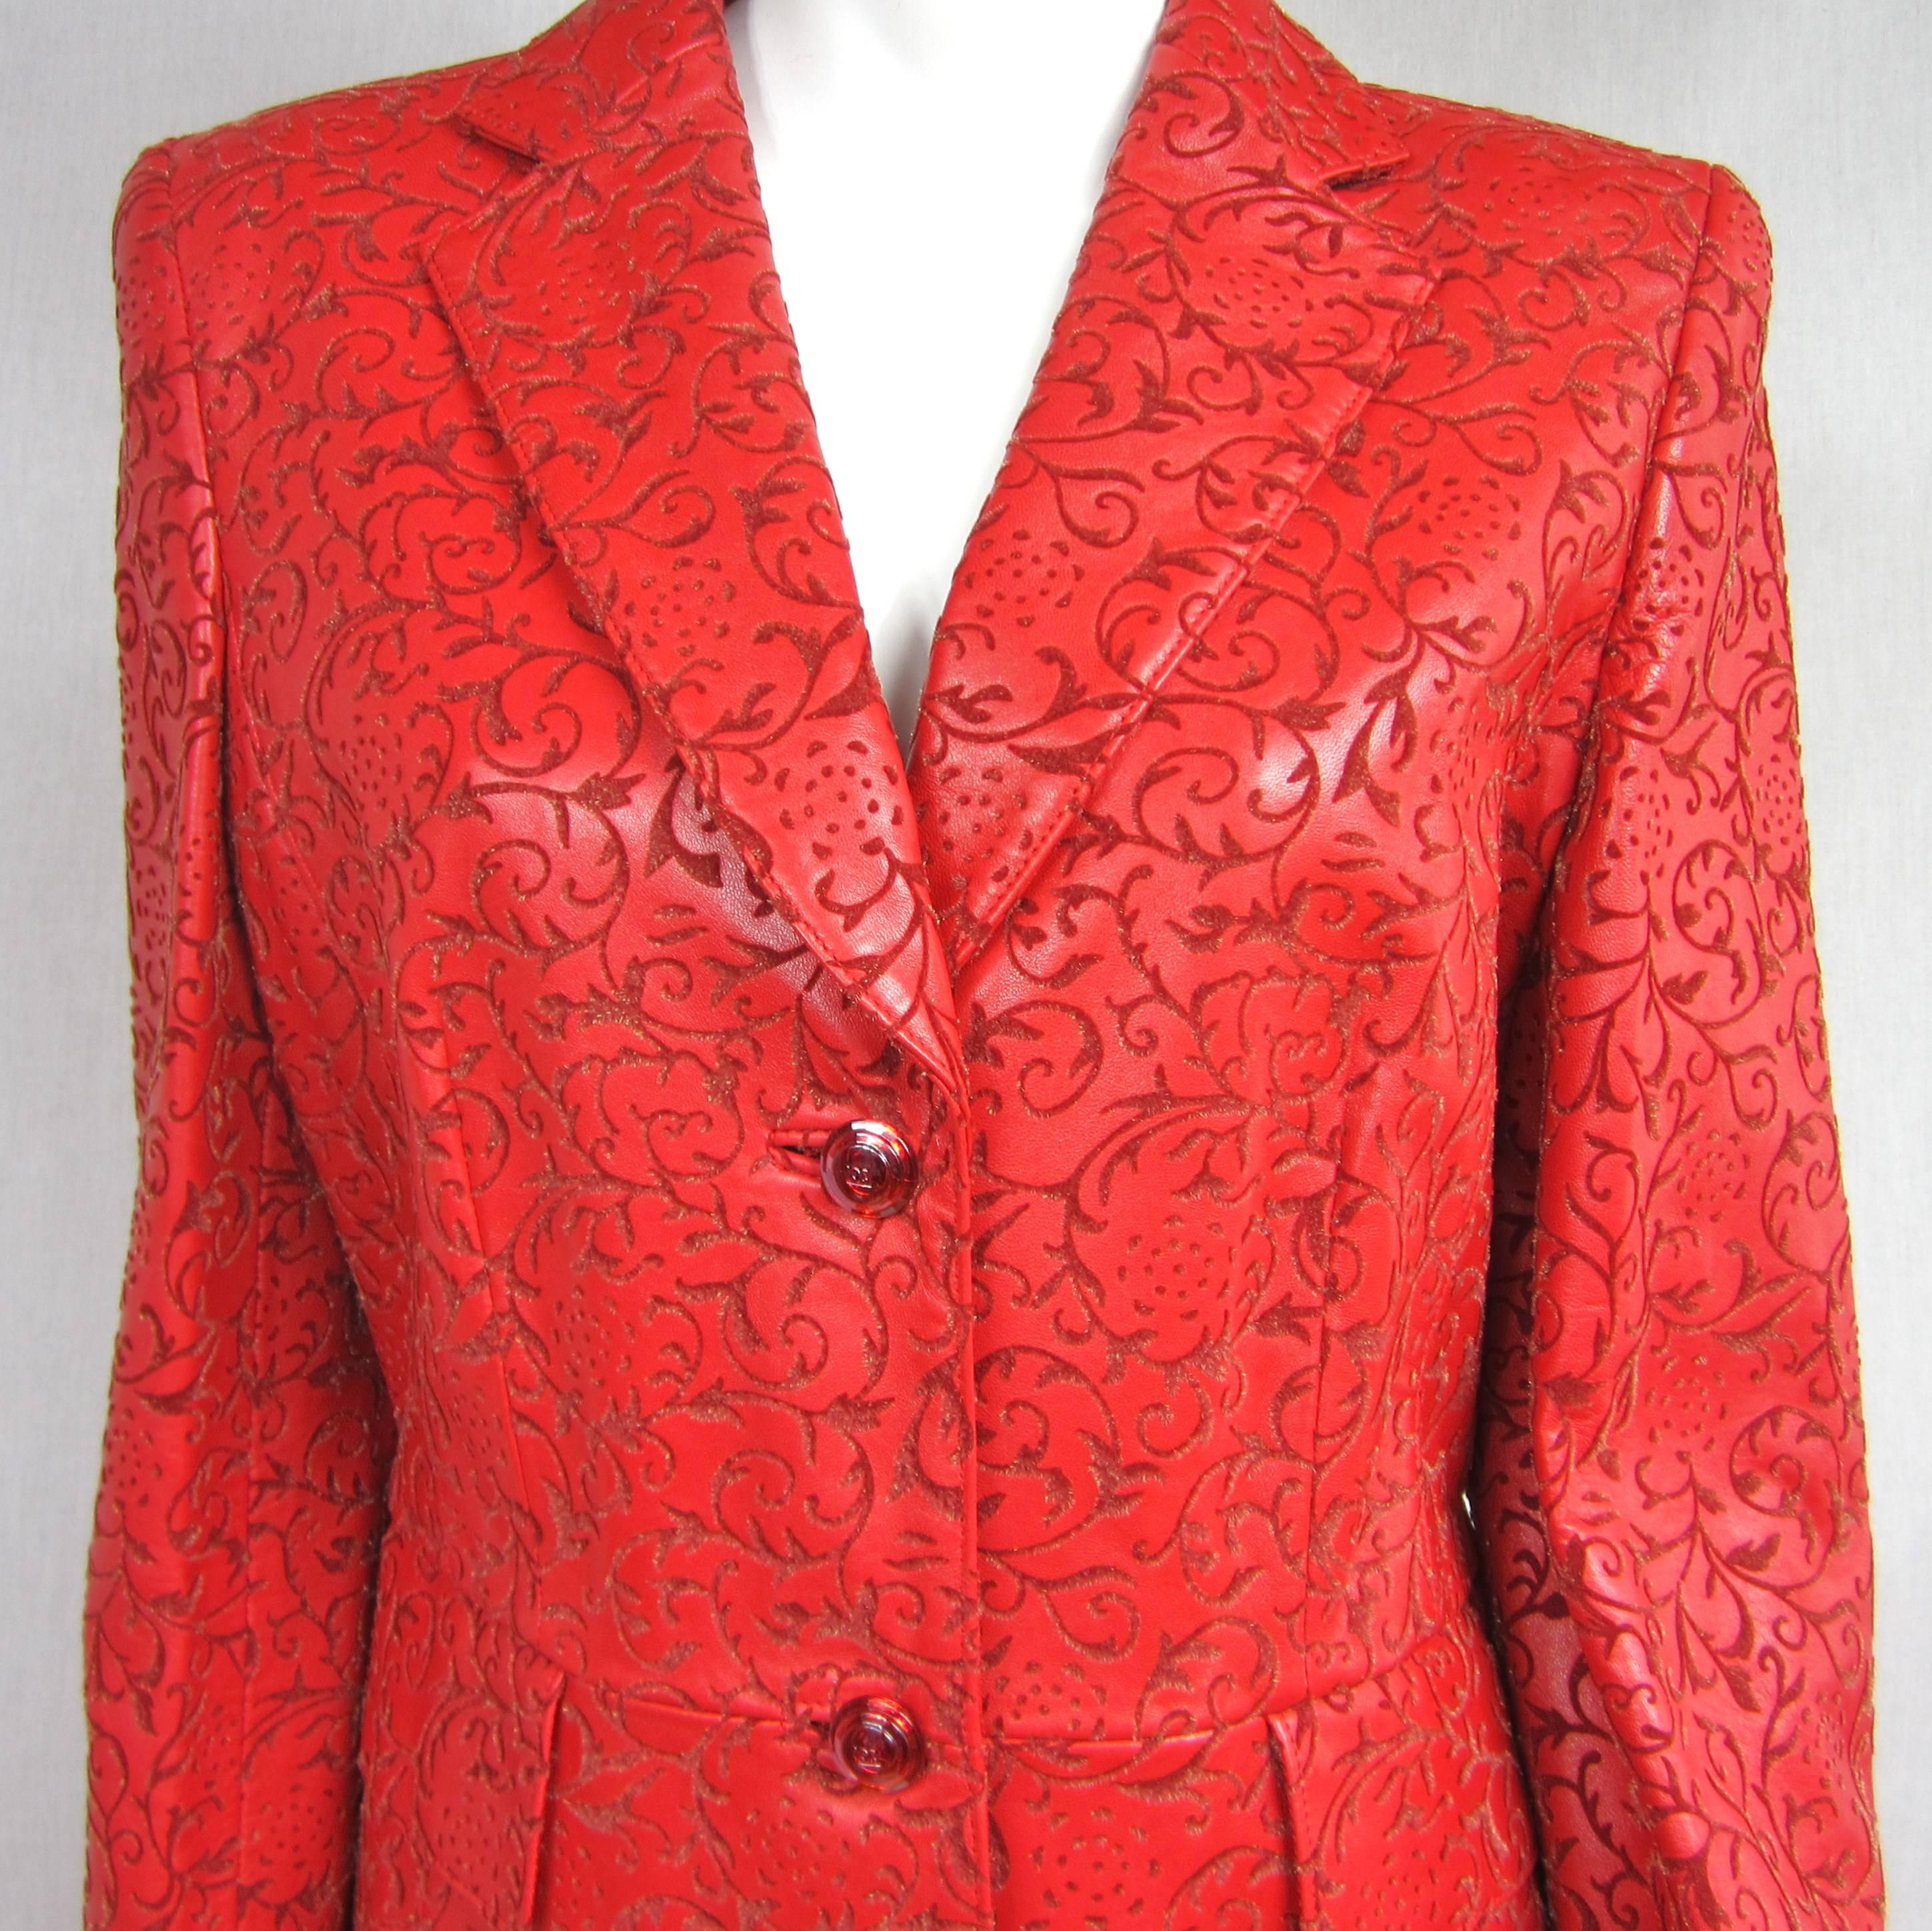 AMAZING SUIT in a more amazing COLOR Again, NEW OLD STOCK with the Price tags still attached. Take a look at the embossed motif on this set. It has s subtle shimmer to it. Stunning! Escada Red Leather Fitted Jacket and Skirt, Embossed with a floral